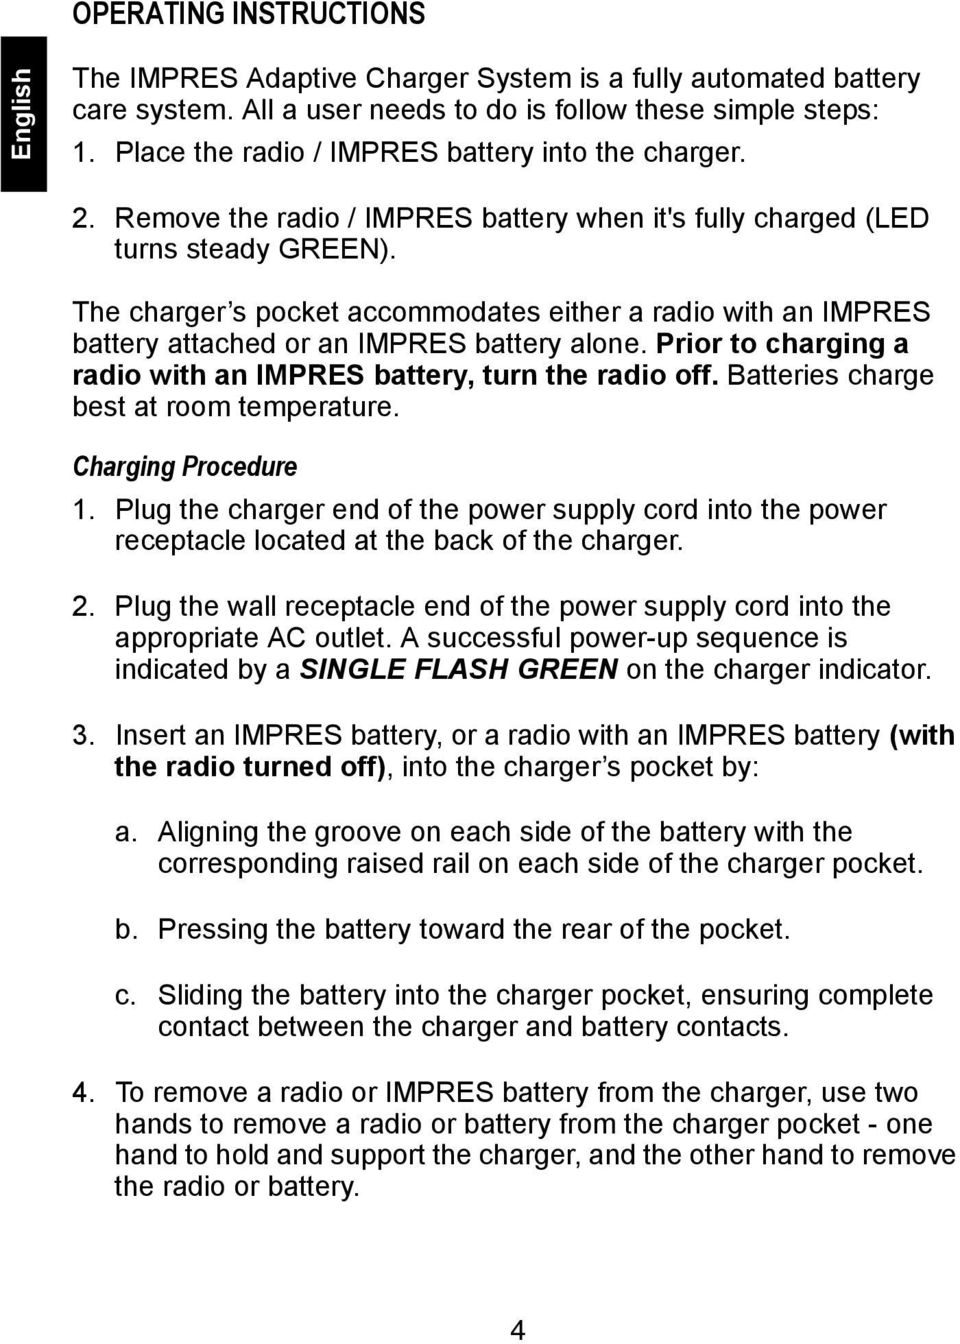 The charger s pocket accommodates either a radio with an IMPRES battery attached or an IMPRES battery alone. Prior to charging a radio with an IMPRES battery, turn the radio off.